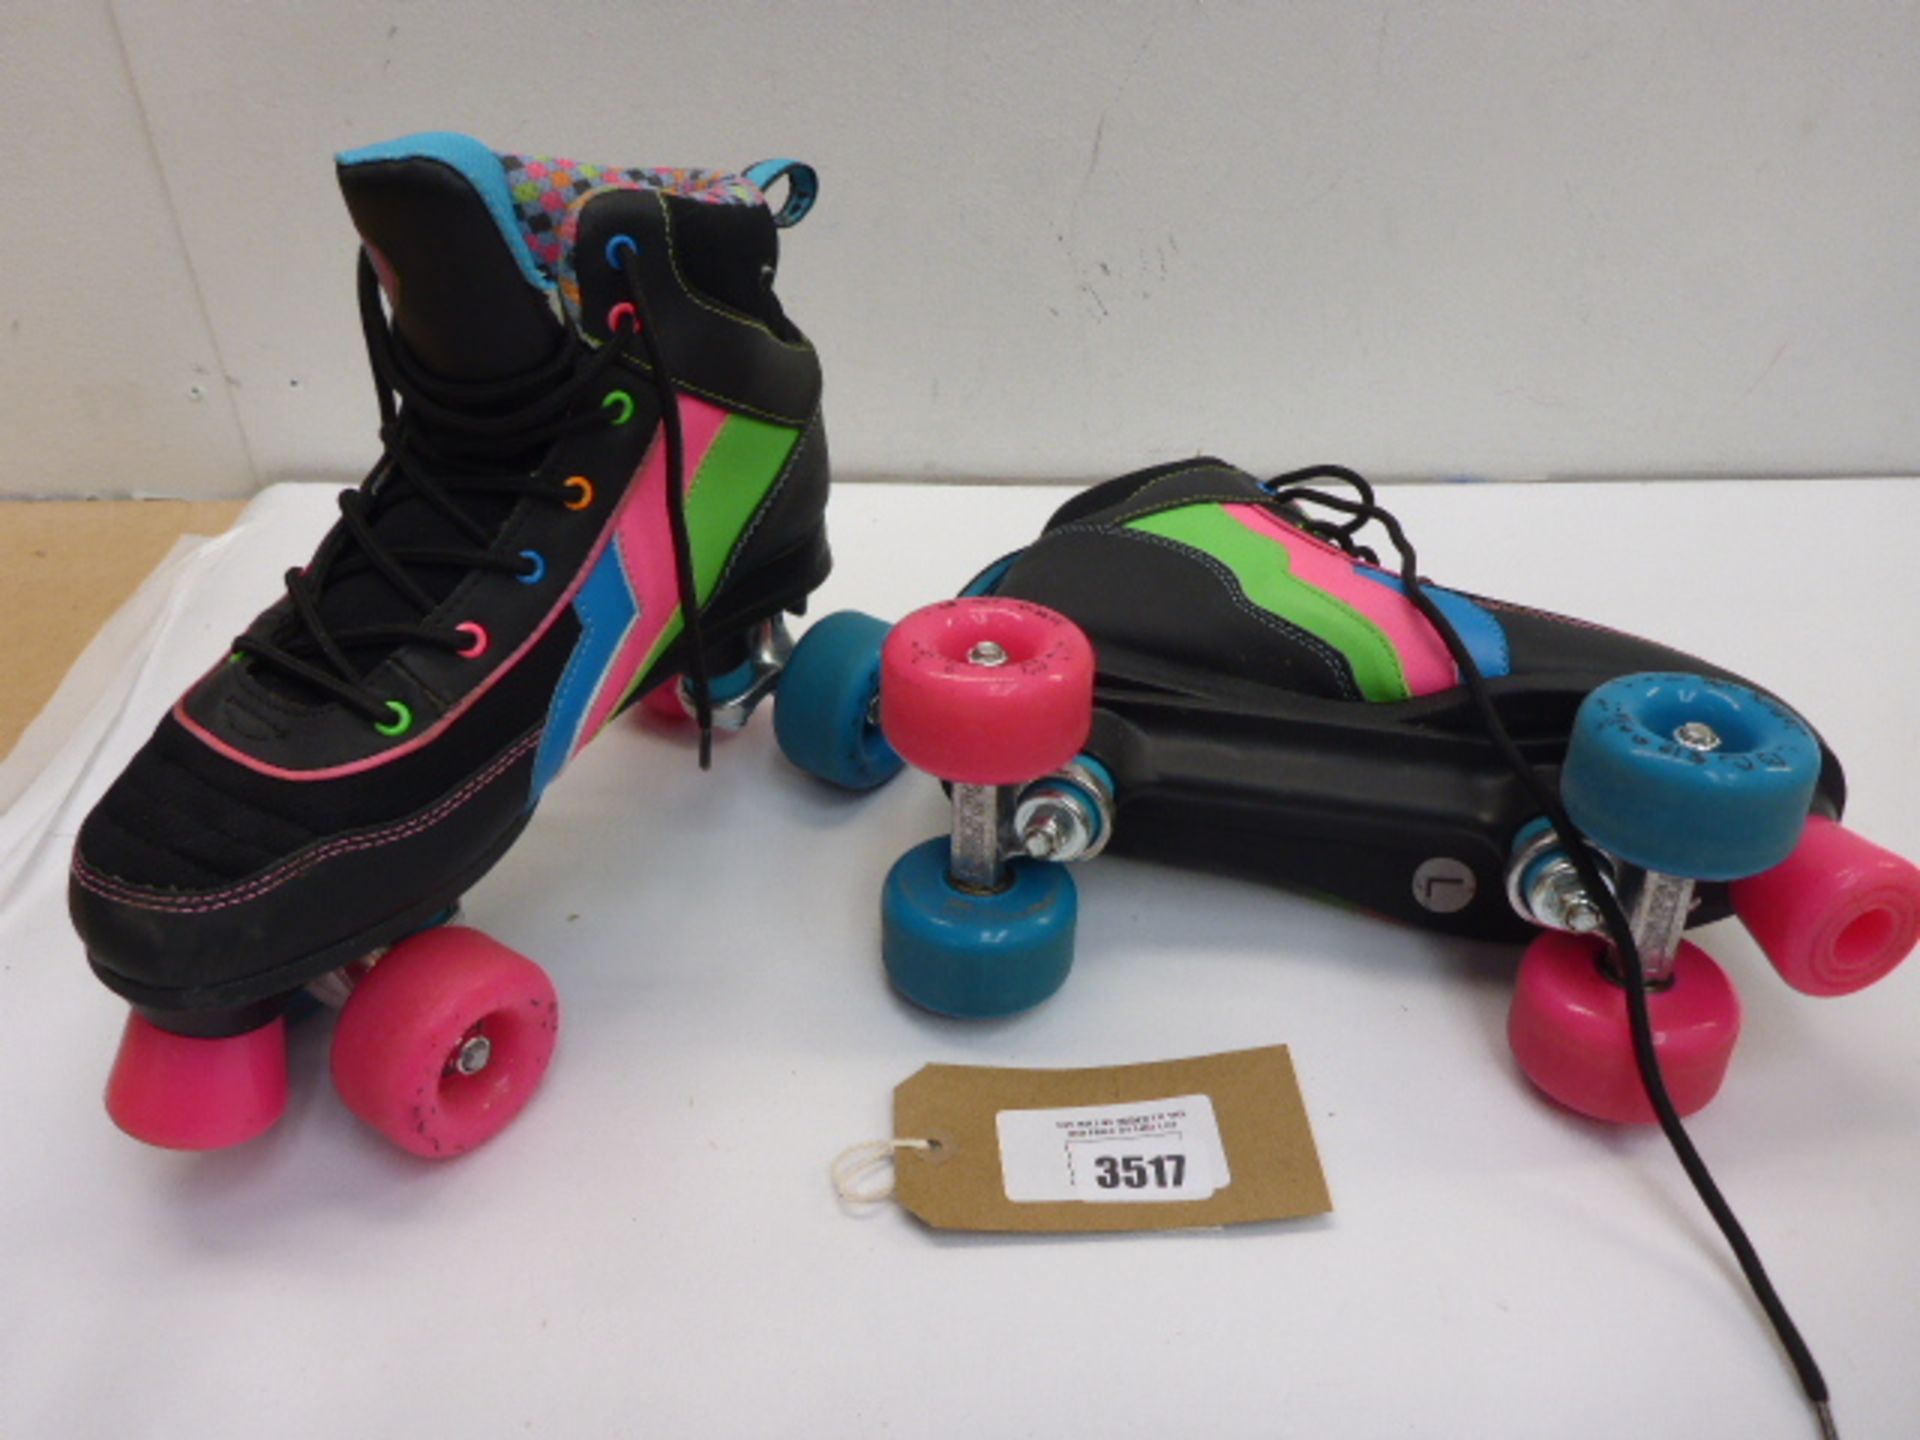 Pair of Passion Rio Roller skates Size 8 (used)